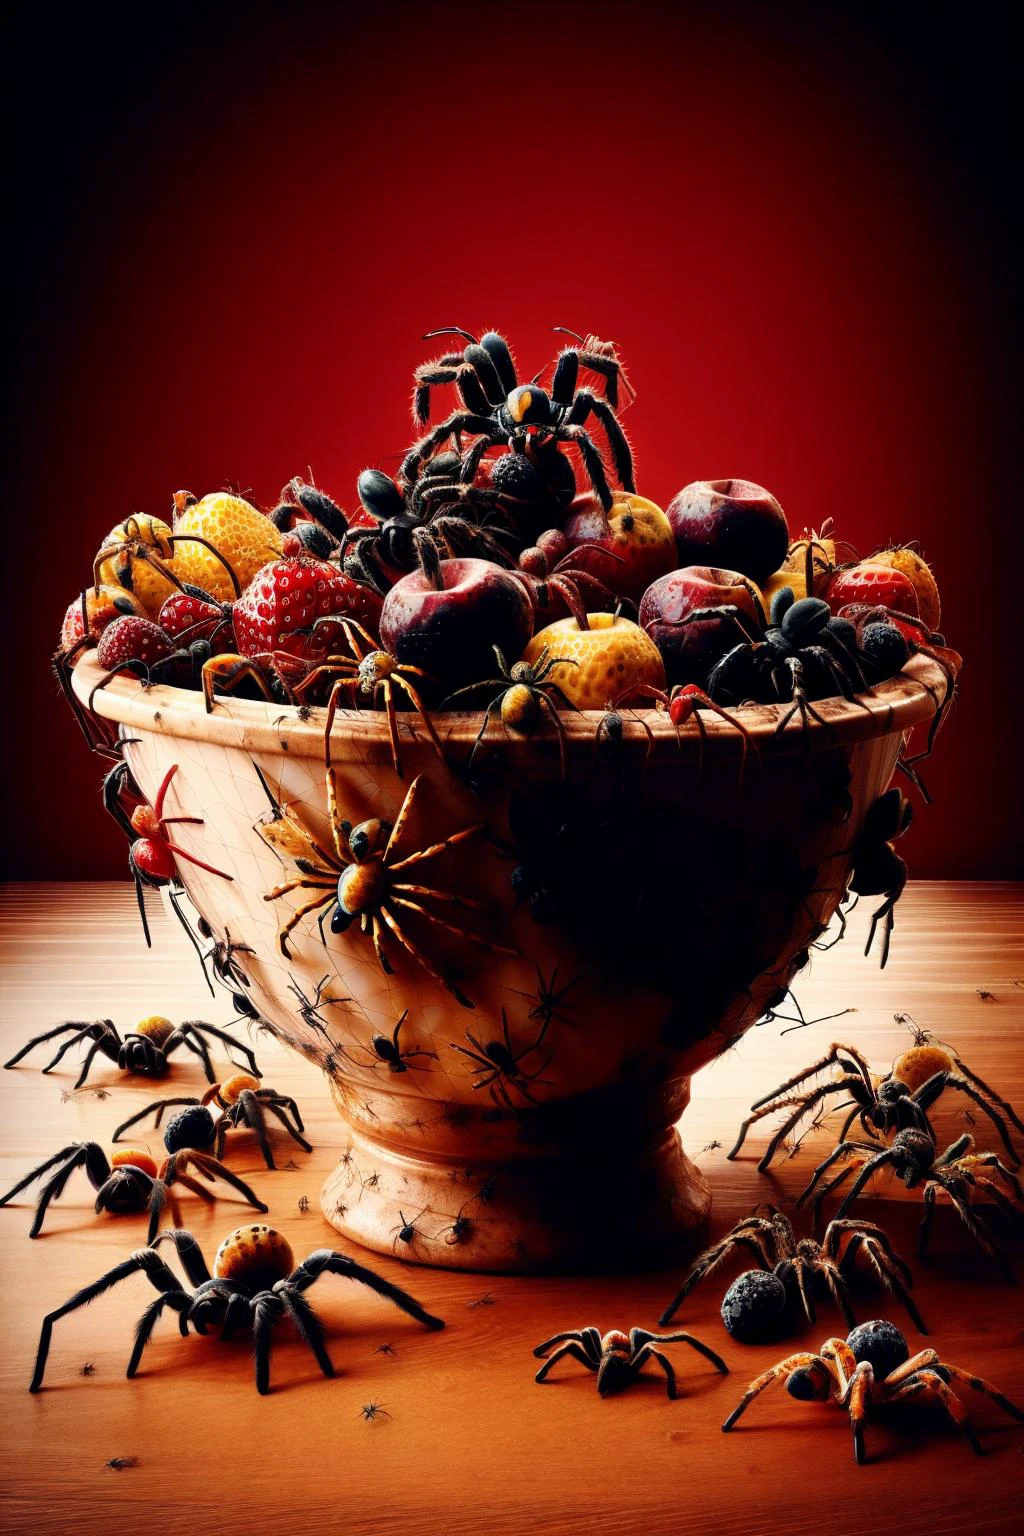 Ais-spiderz in a bowl of fruit, on a kitchen counter 